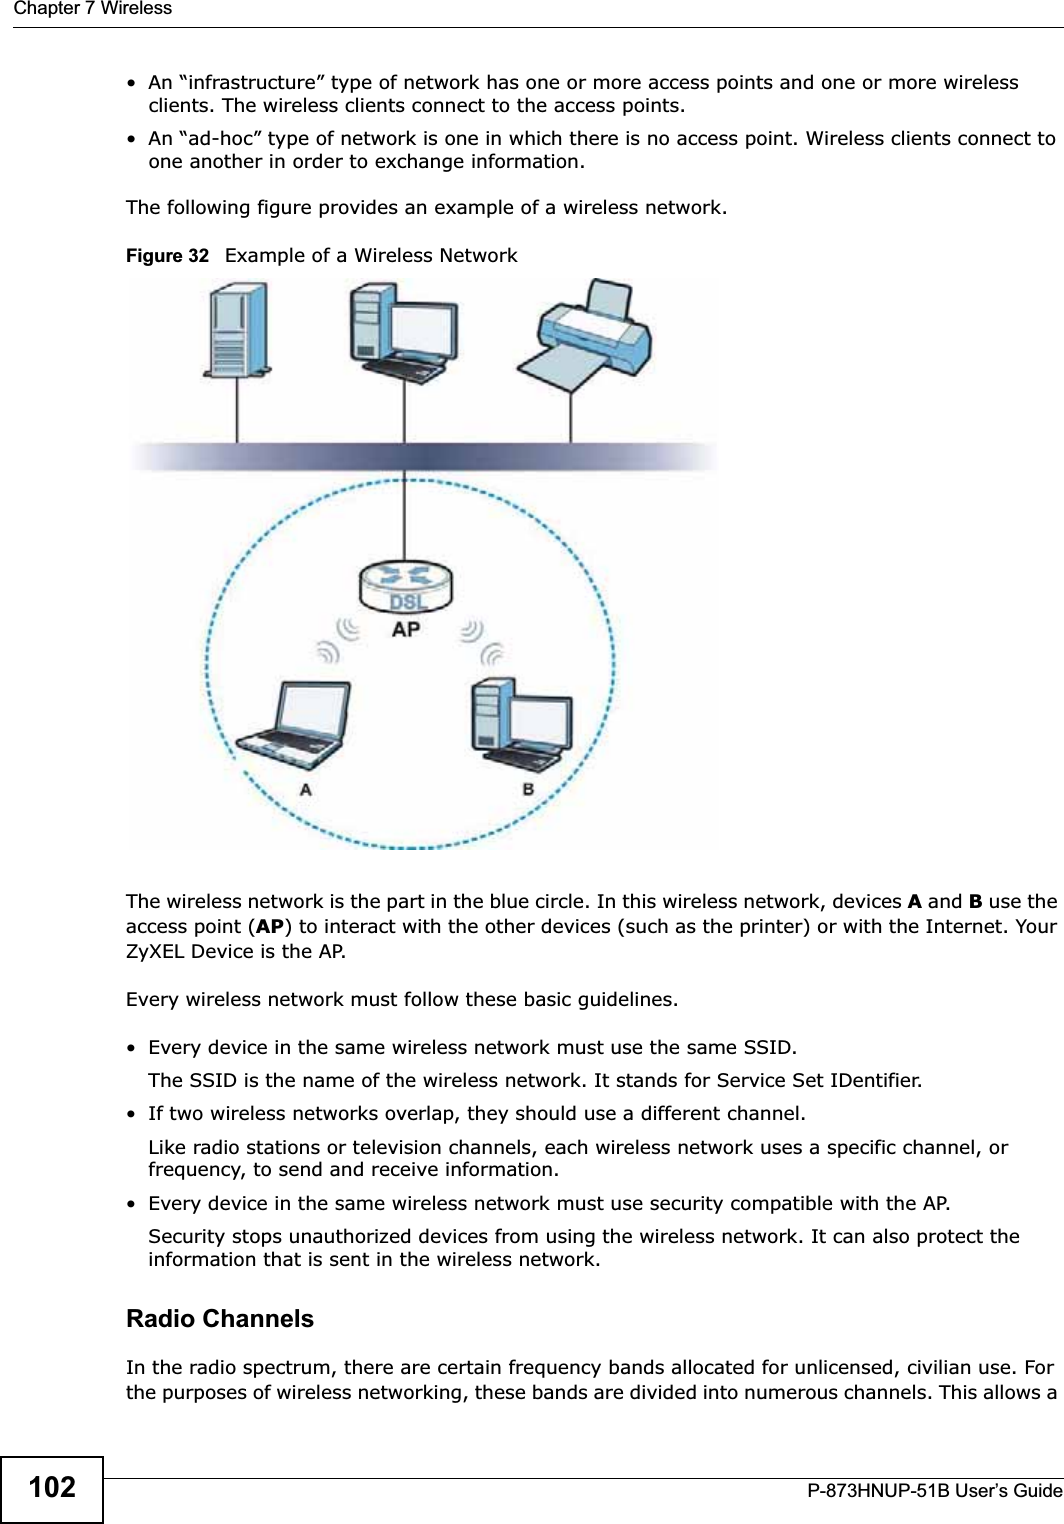 Chapter 7 WirelessP-873HNUP-51B User’s Guide102• An “infrastructure” type of network has one or more access points and one or more wireless clients. The wireless clients connect to the access points.• An “ad-hoc” type of network is one in which there is no access point. Wireless clients connect to one another in order to exchange information.The following figure provides an example of a wireless network.Figure 32   Example of a Wireless NetworkThe wireless network is the part in the blue circle. In this wireless network, devices A and B use the access point (AP) to interact with the other devices (such as the printer) or with the Internet. Your ZyXEL Device is the AP.Every wireless network must follow these basic guidelines.• Every device in the same wireless network must use the same SSID.The SSID is the name of the wireless network. It stands for Service Set IDentifier.• If two wireless networks overlap, they should use a different channel.Like radio stations or television channels, each wireless network uses a specific channel, or frequency, to send and receive information.• Every device in the same wireless network must use security compatible with the AP.Security stops unauthorized devices from using the wireless network. It can also protect the information that is sent in the wireless network.Radio ChannelsIn the radio spectrum, there are certain frequency bands allocated for unlicensed, civilian use. For the purposes of wireless networking, these bands are divided into numerous channels. This allows a 